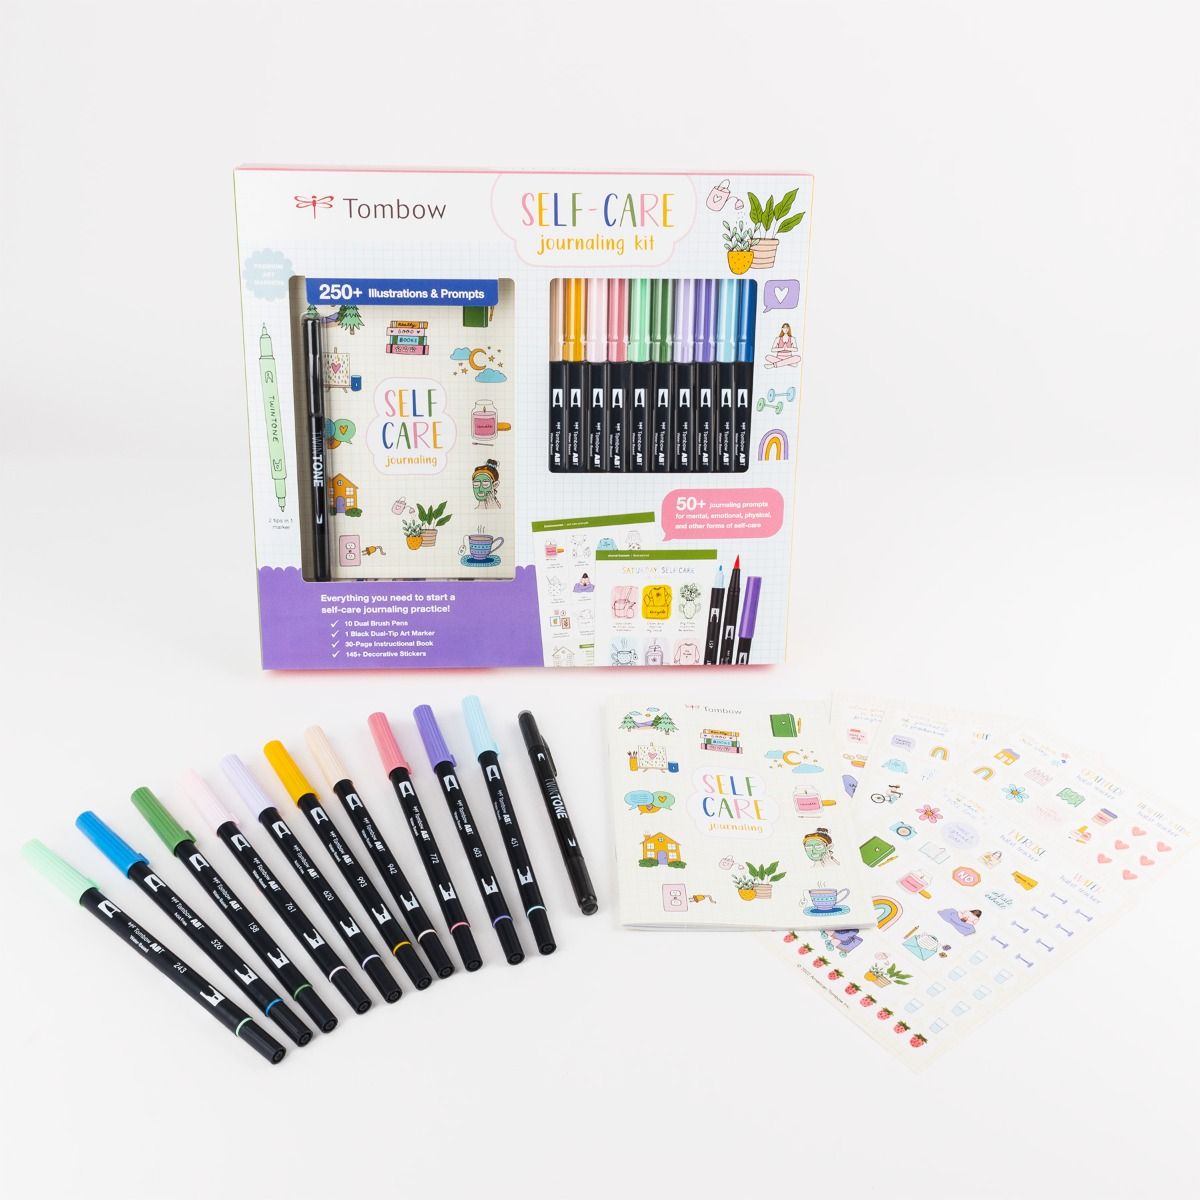 Tombow Self-Care Journaling Kit  Cooper-Young Gallery + Gift Shop